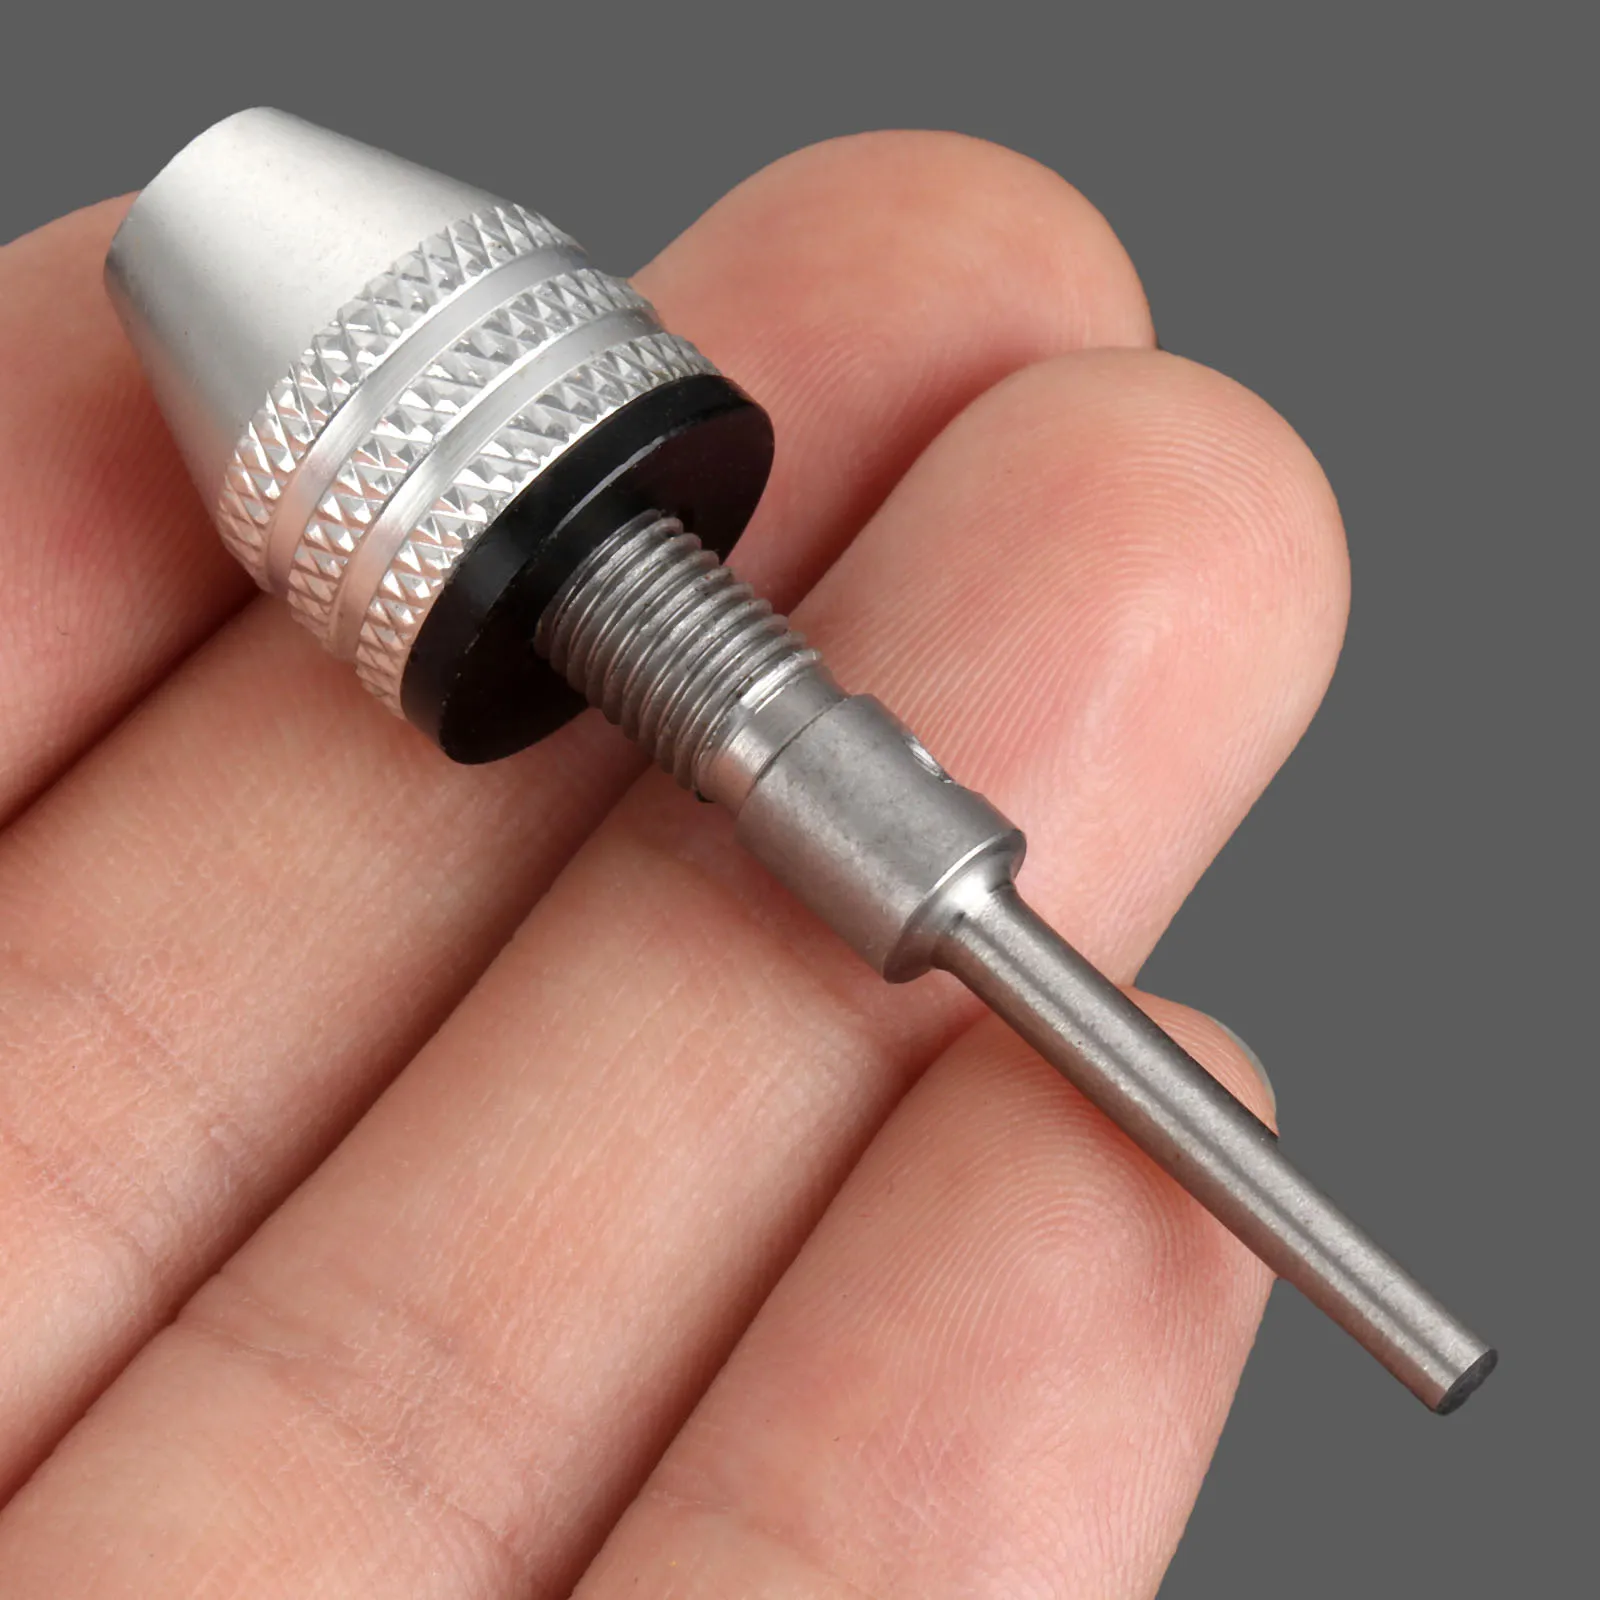 3mm Shank Mini Drill Chuck Adapter Converter For Power Impact Driver Grinding Engraving Machine Conversion Drill Chuck 0.3-3.4mm fee shipping harder steel glensteel hss jewellery tools graver engraving knife pneumatic impact engraver cutting machine